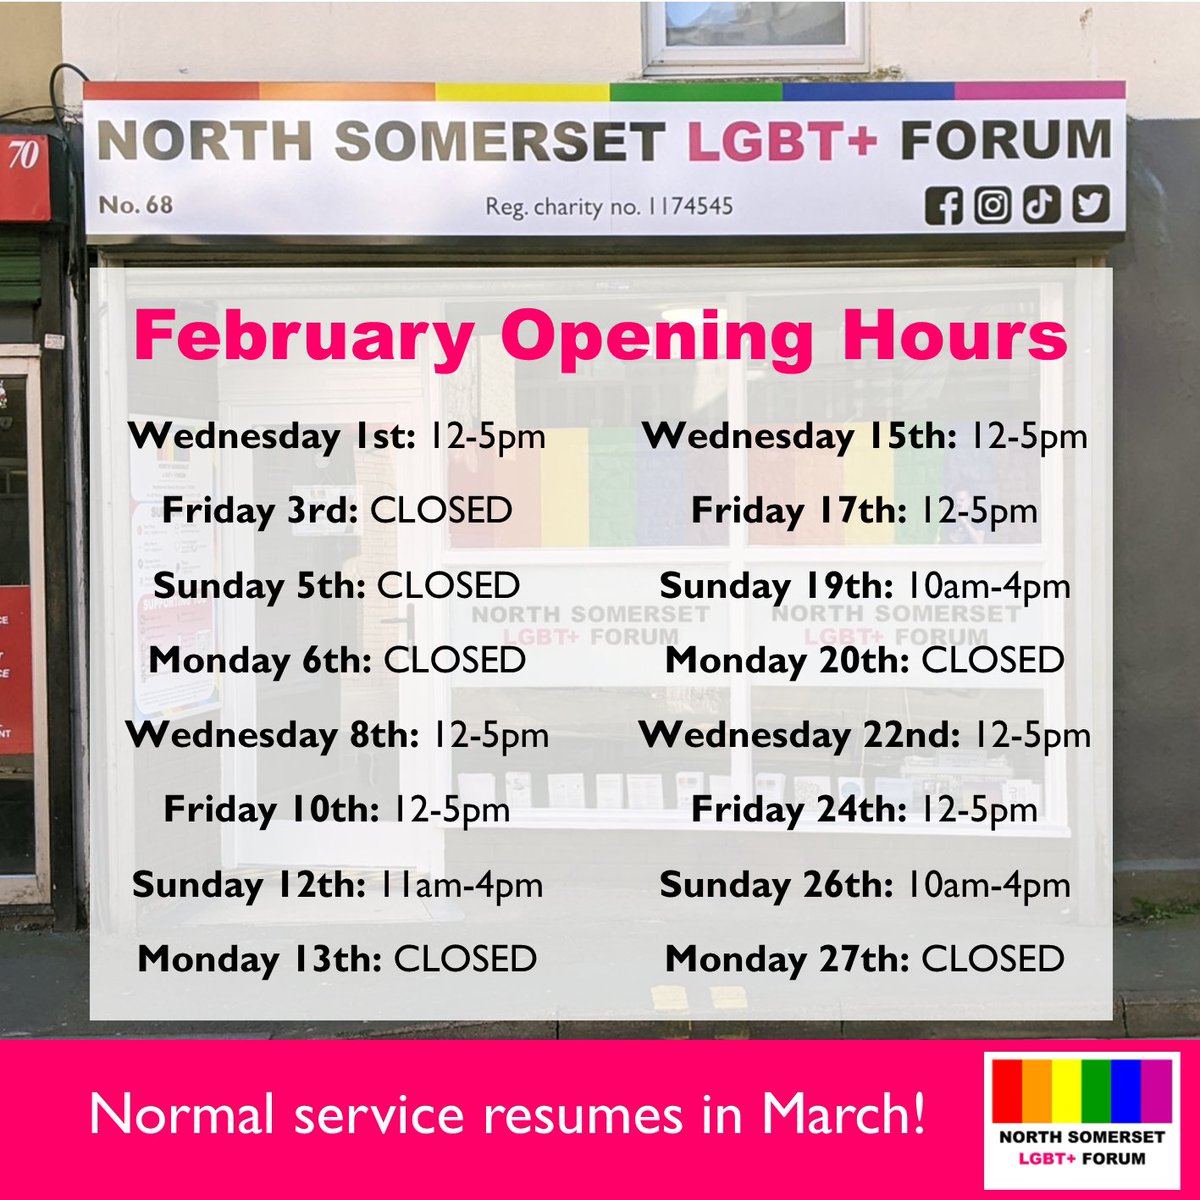 Please note, we will be temporarily altering our opening times this month - normal service will resume in March!